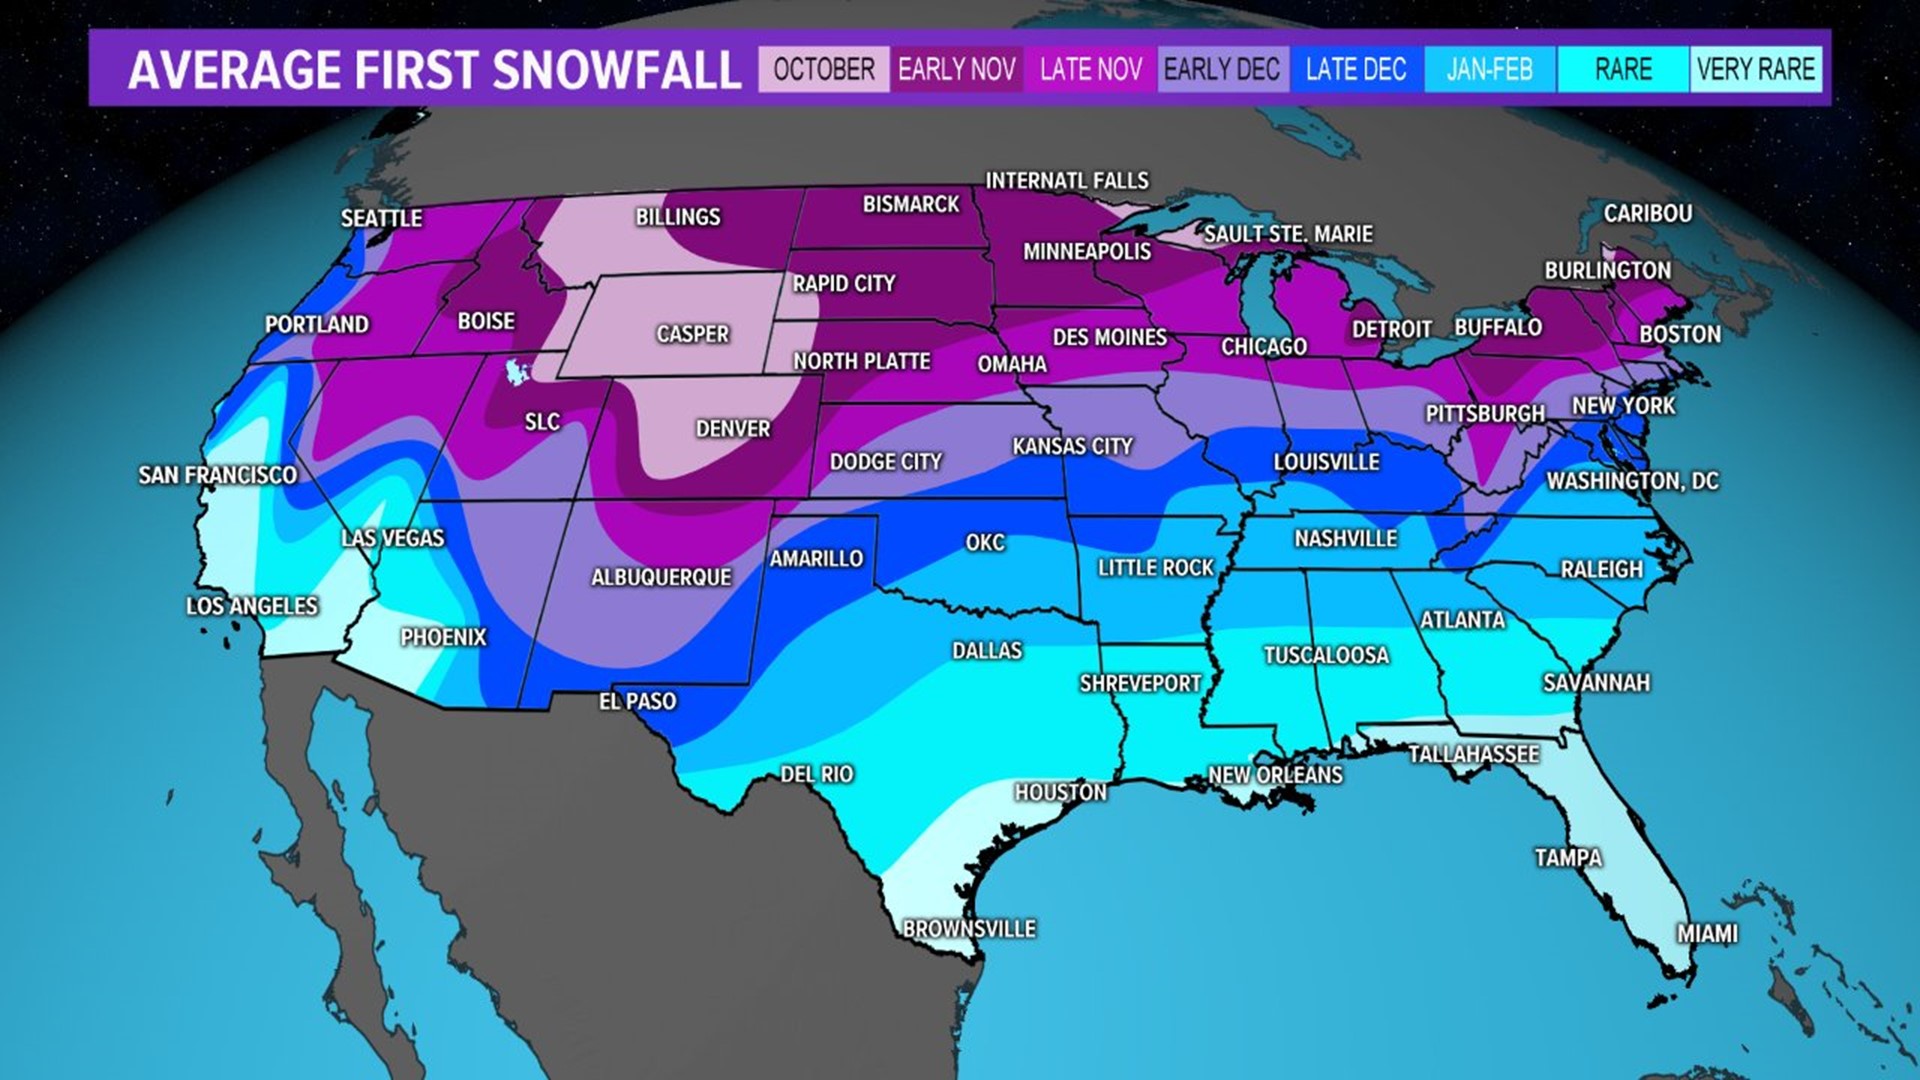 Average first snowfall for the lower48